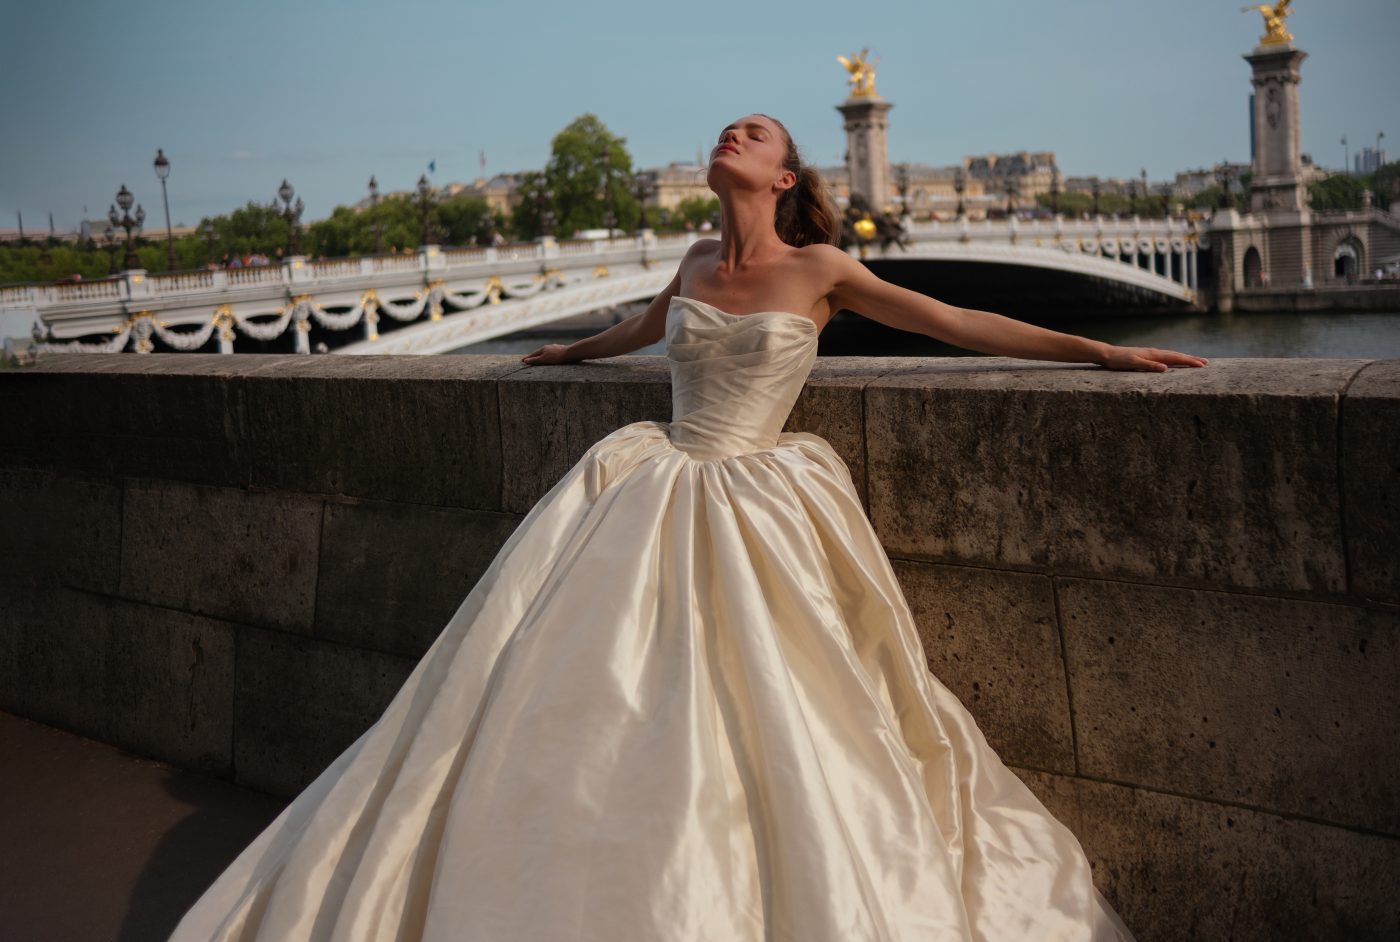 Kleinfeld Bridal  The Largest Selection of Wedding Dresses in the World!